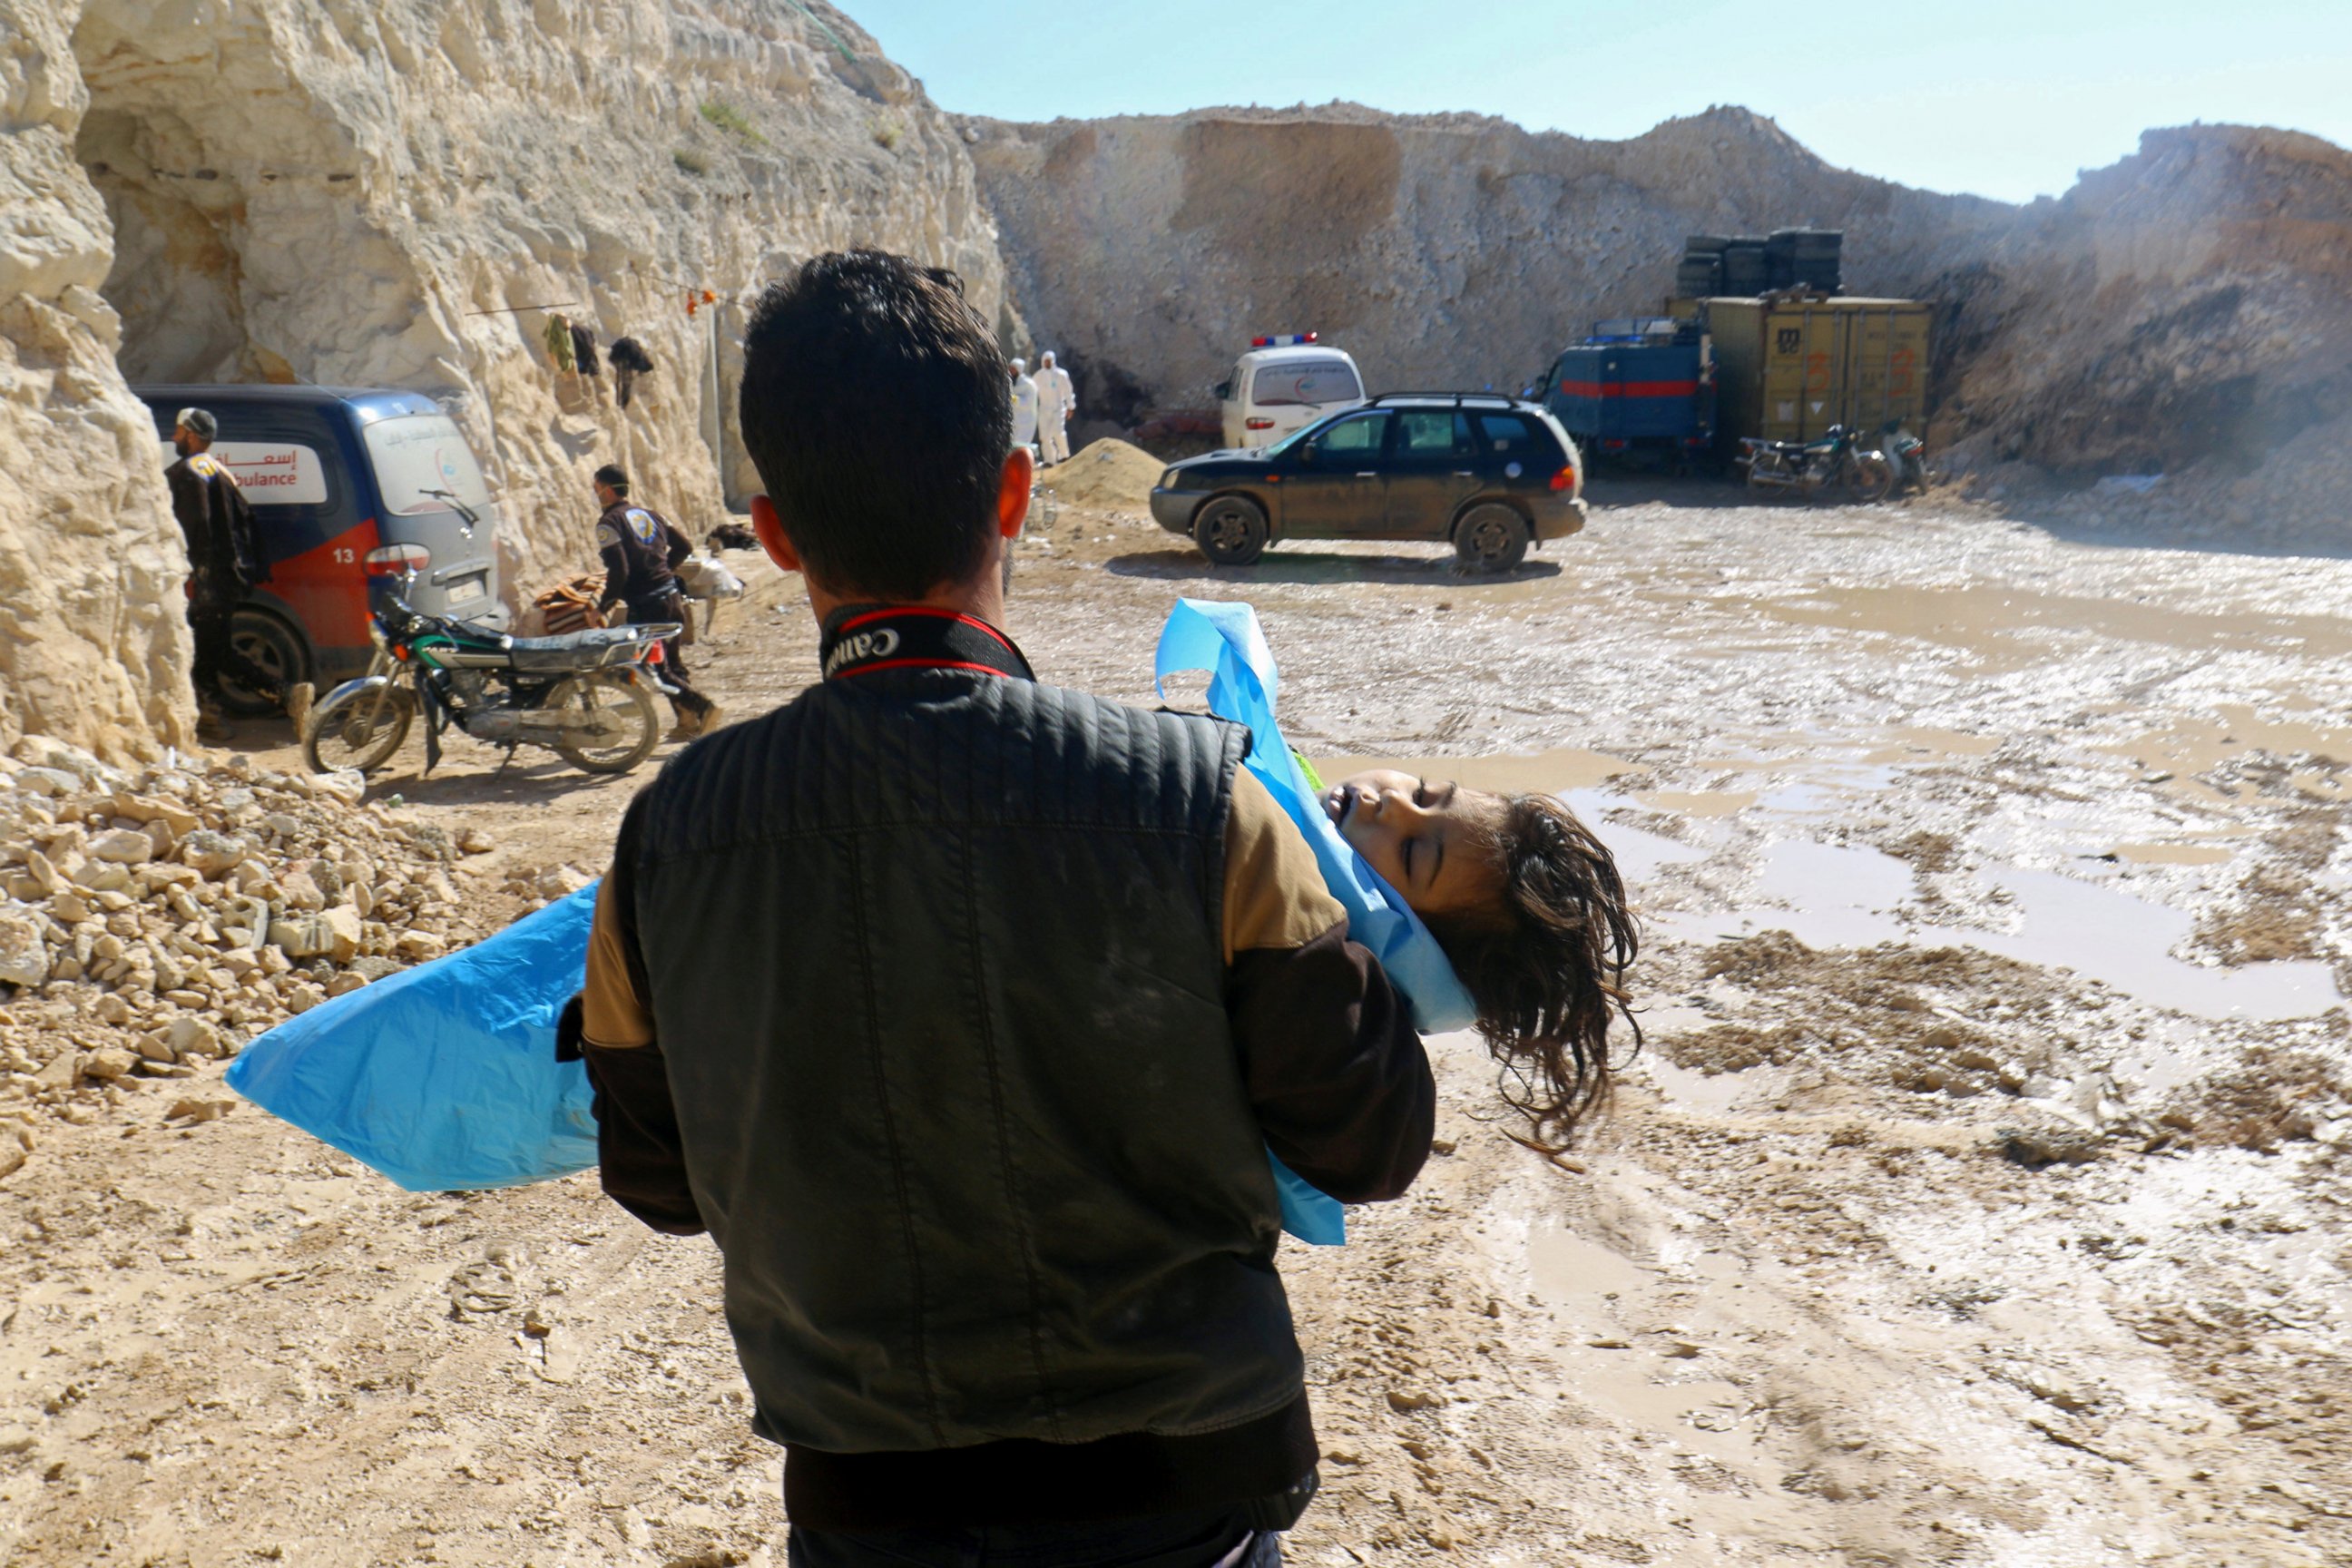 PHOTO: A man carries the body of a dead child after what rescue workers described as a suspected gas attack in the town of Khan Sheikhoun in rebel-held Idlib, Syria, April 4, 2017.